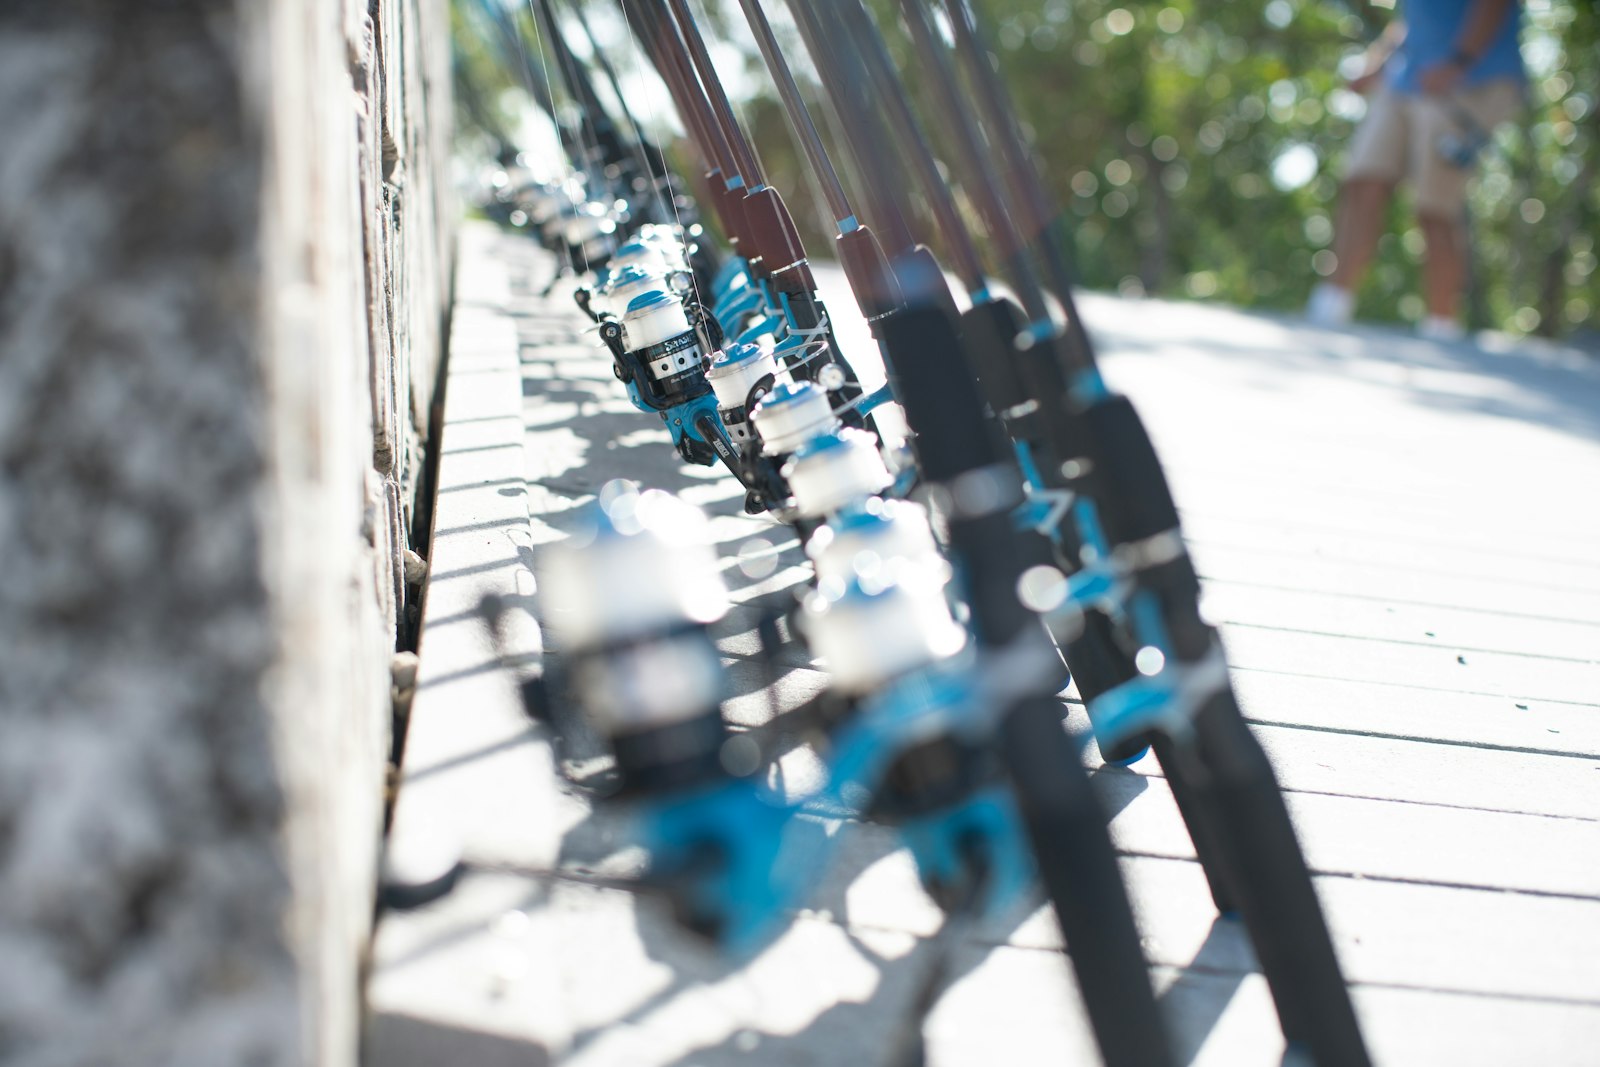 A row of fishing rods lean against the stone facade of a building